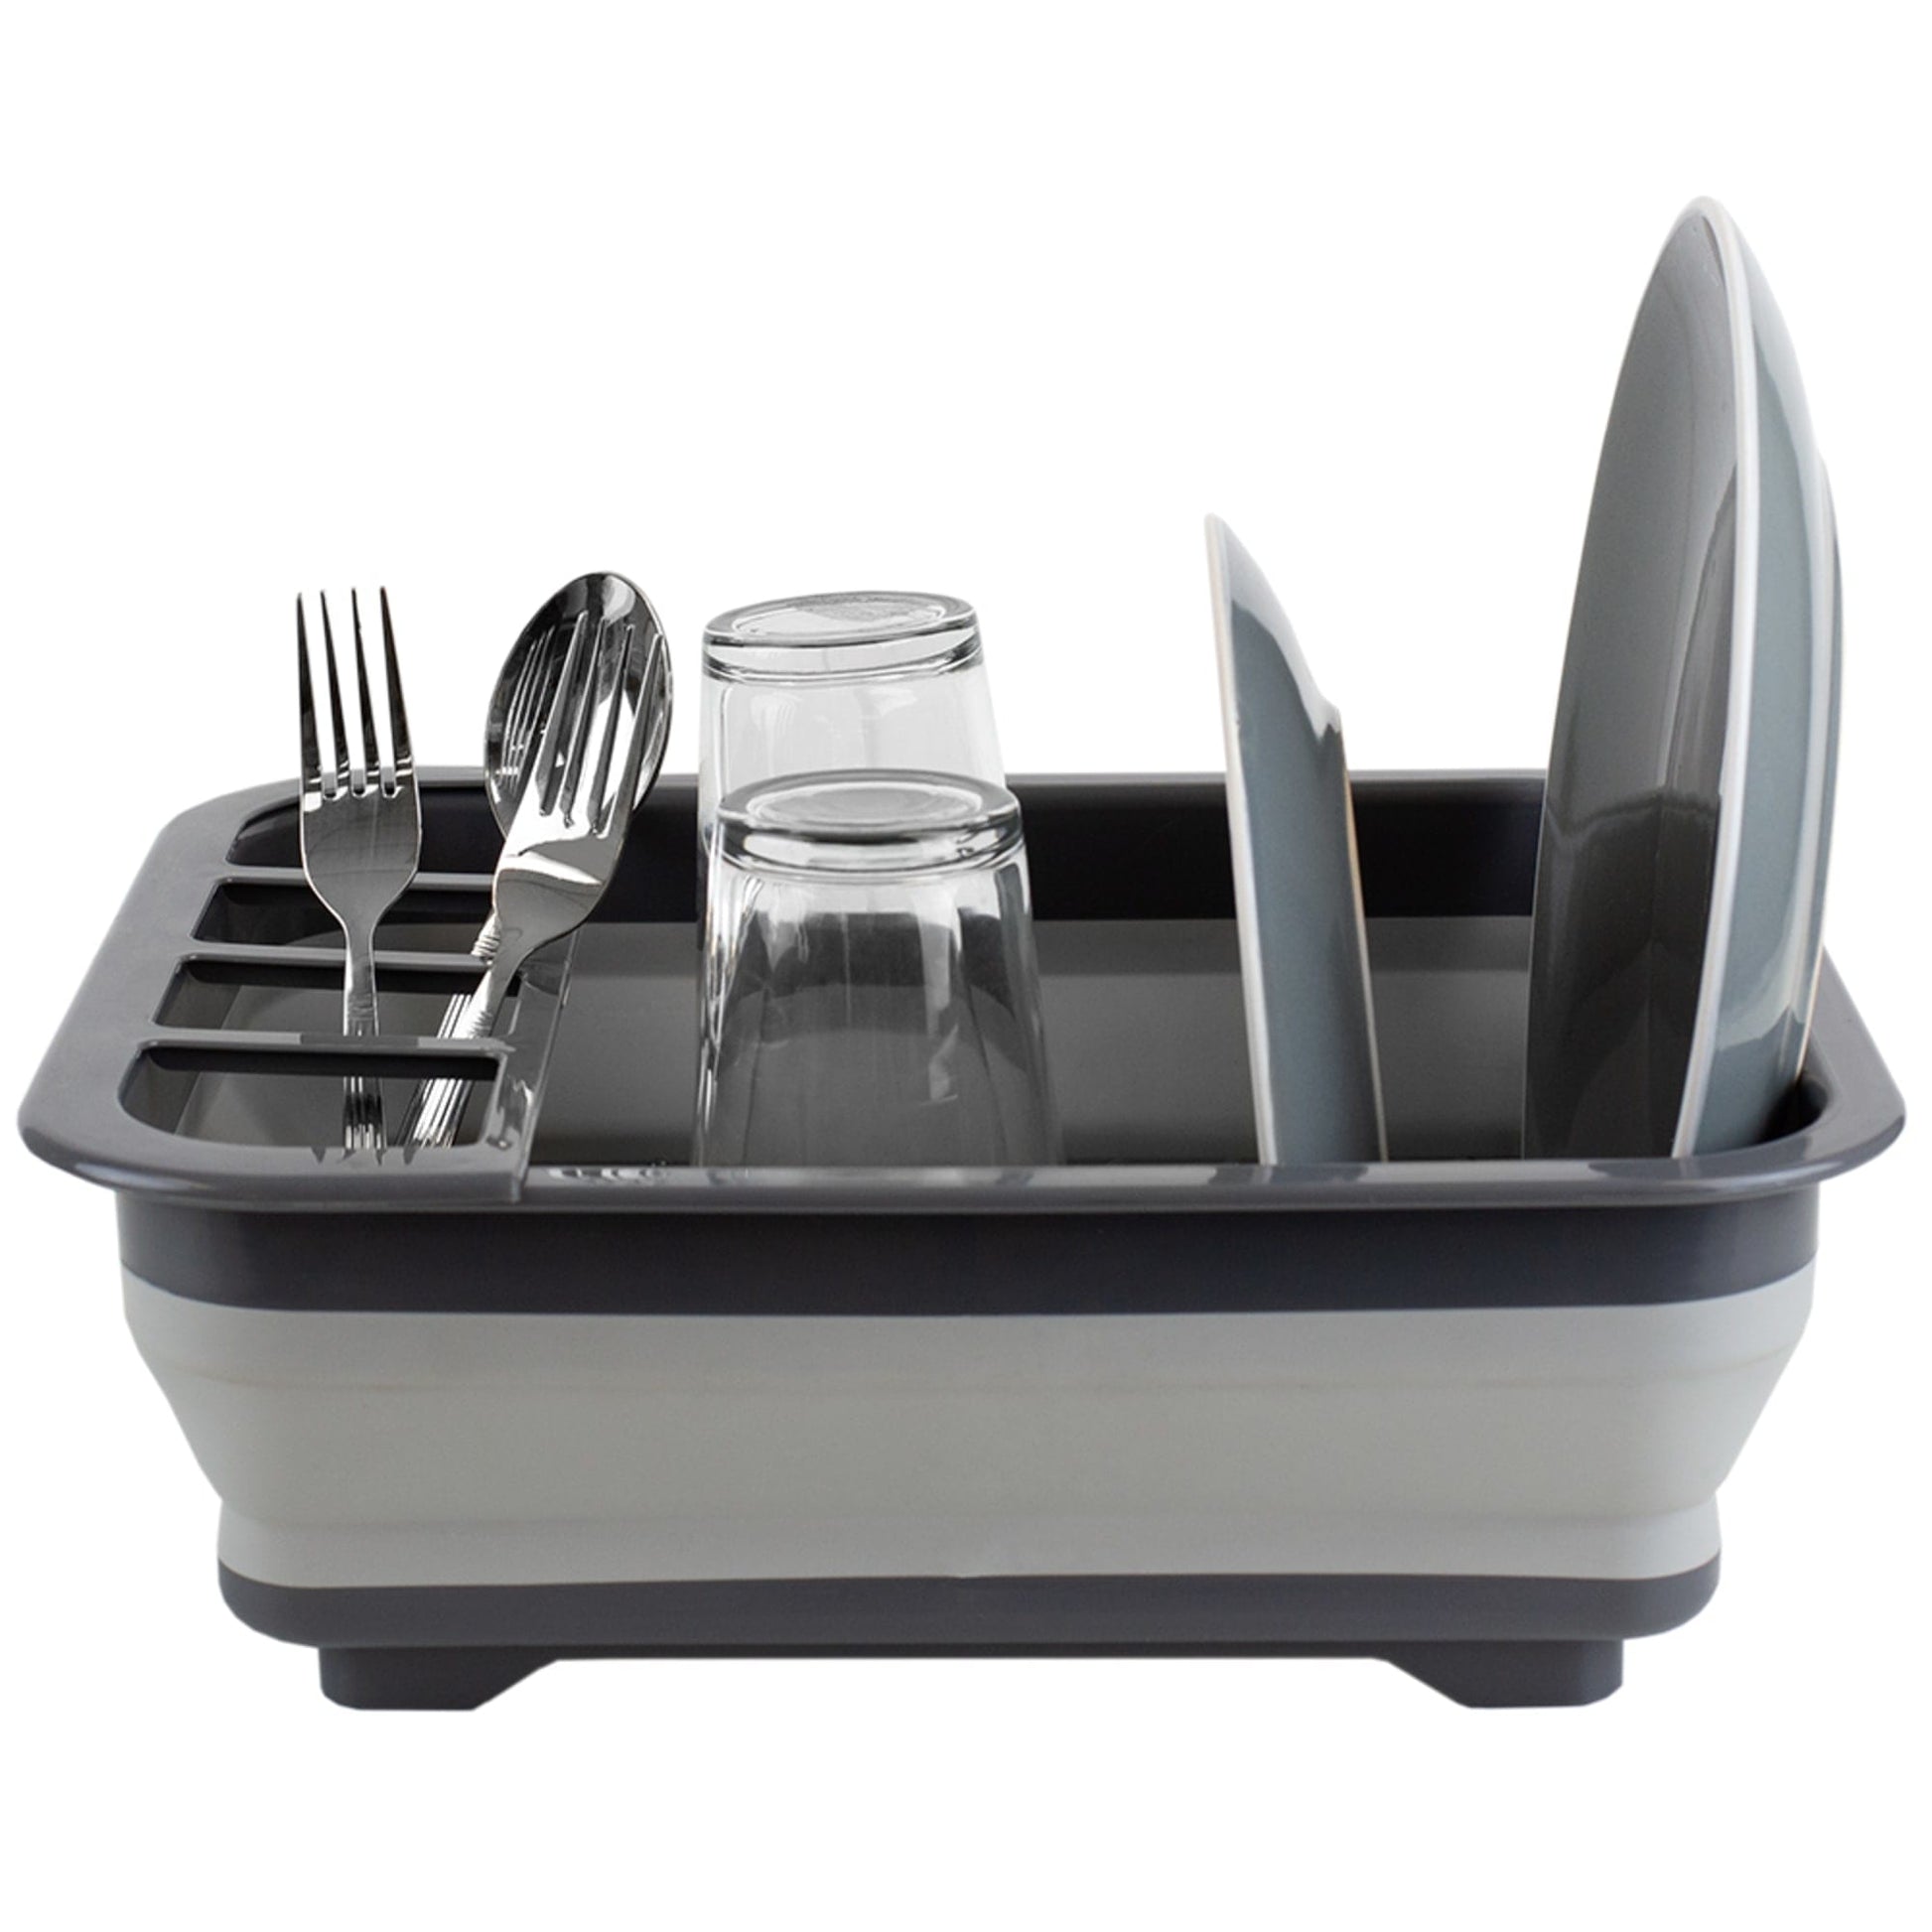  Masirs Pop-Up Collapsible Dish Drying Rack